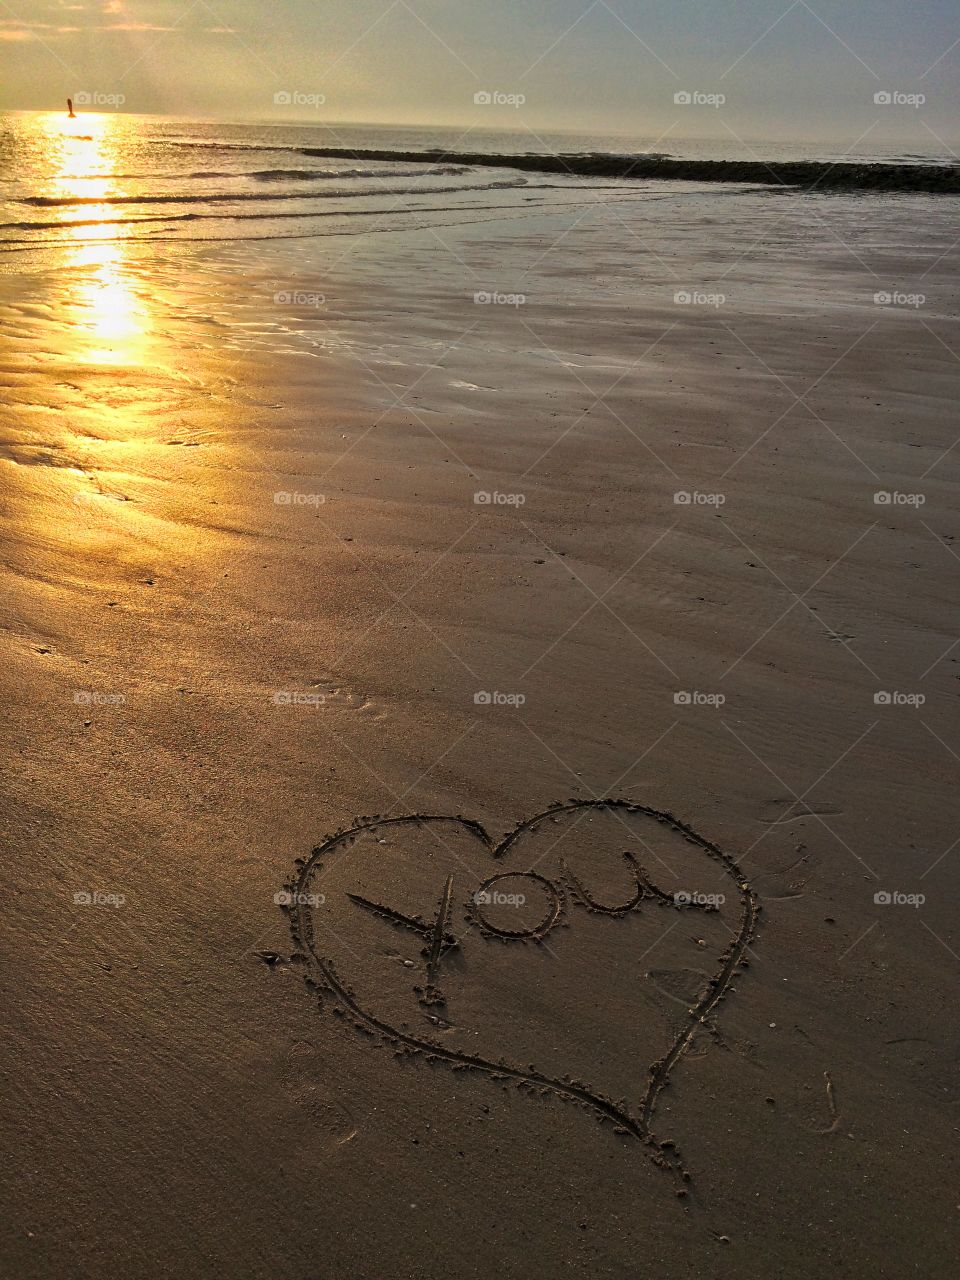 Heart with "you" in the sand. Just an idea... But the heart becomes a little ugly :D
